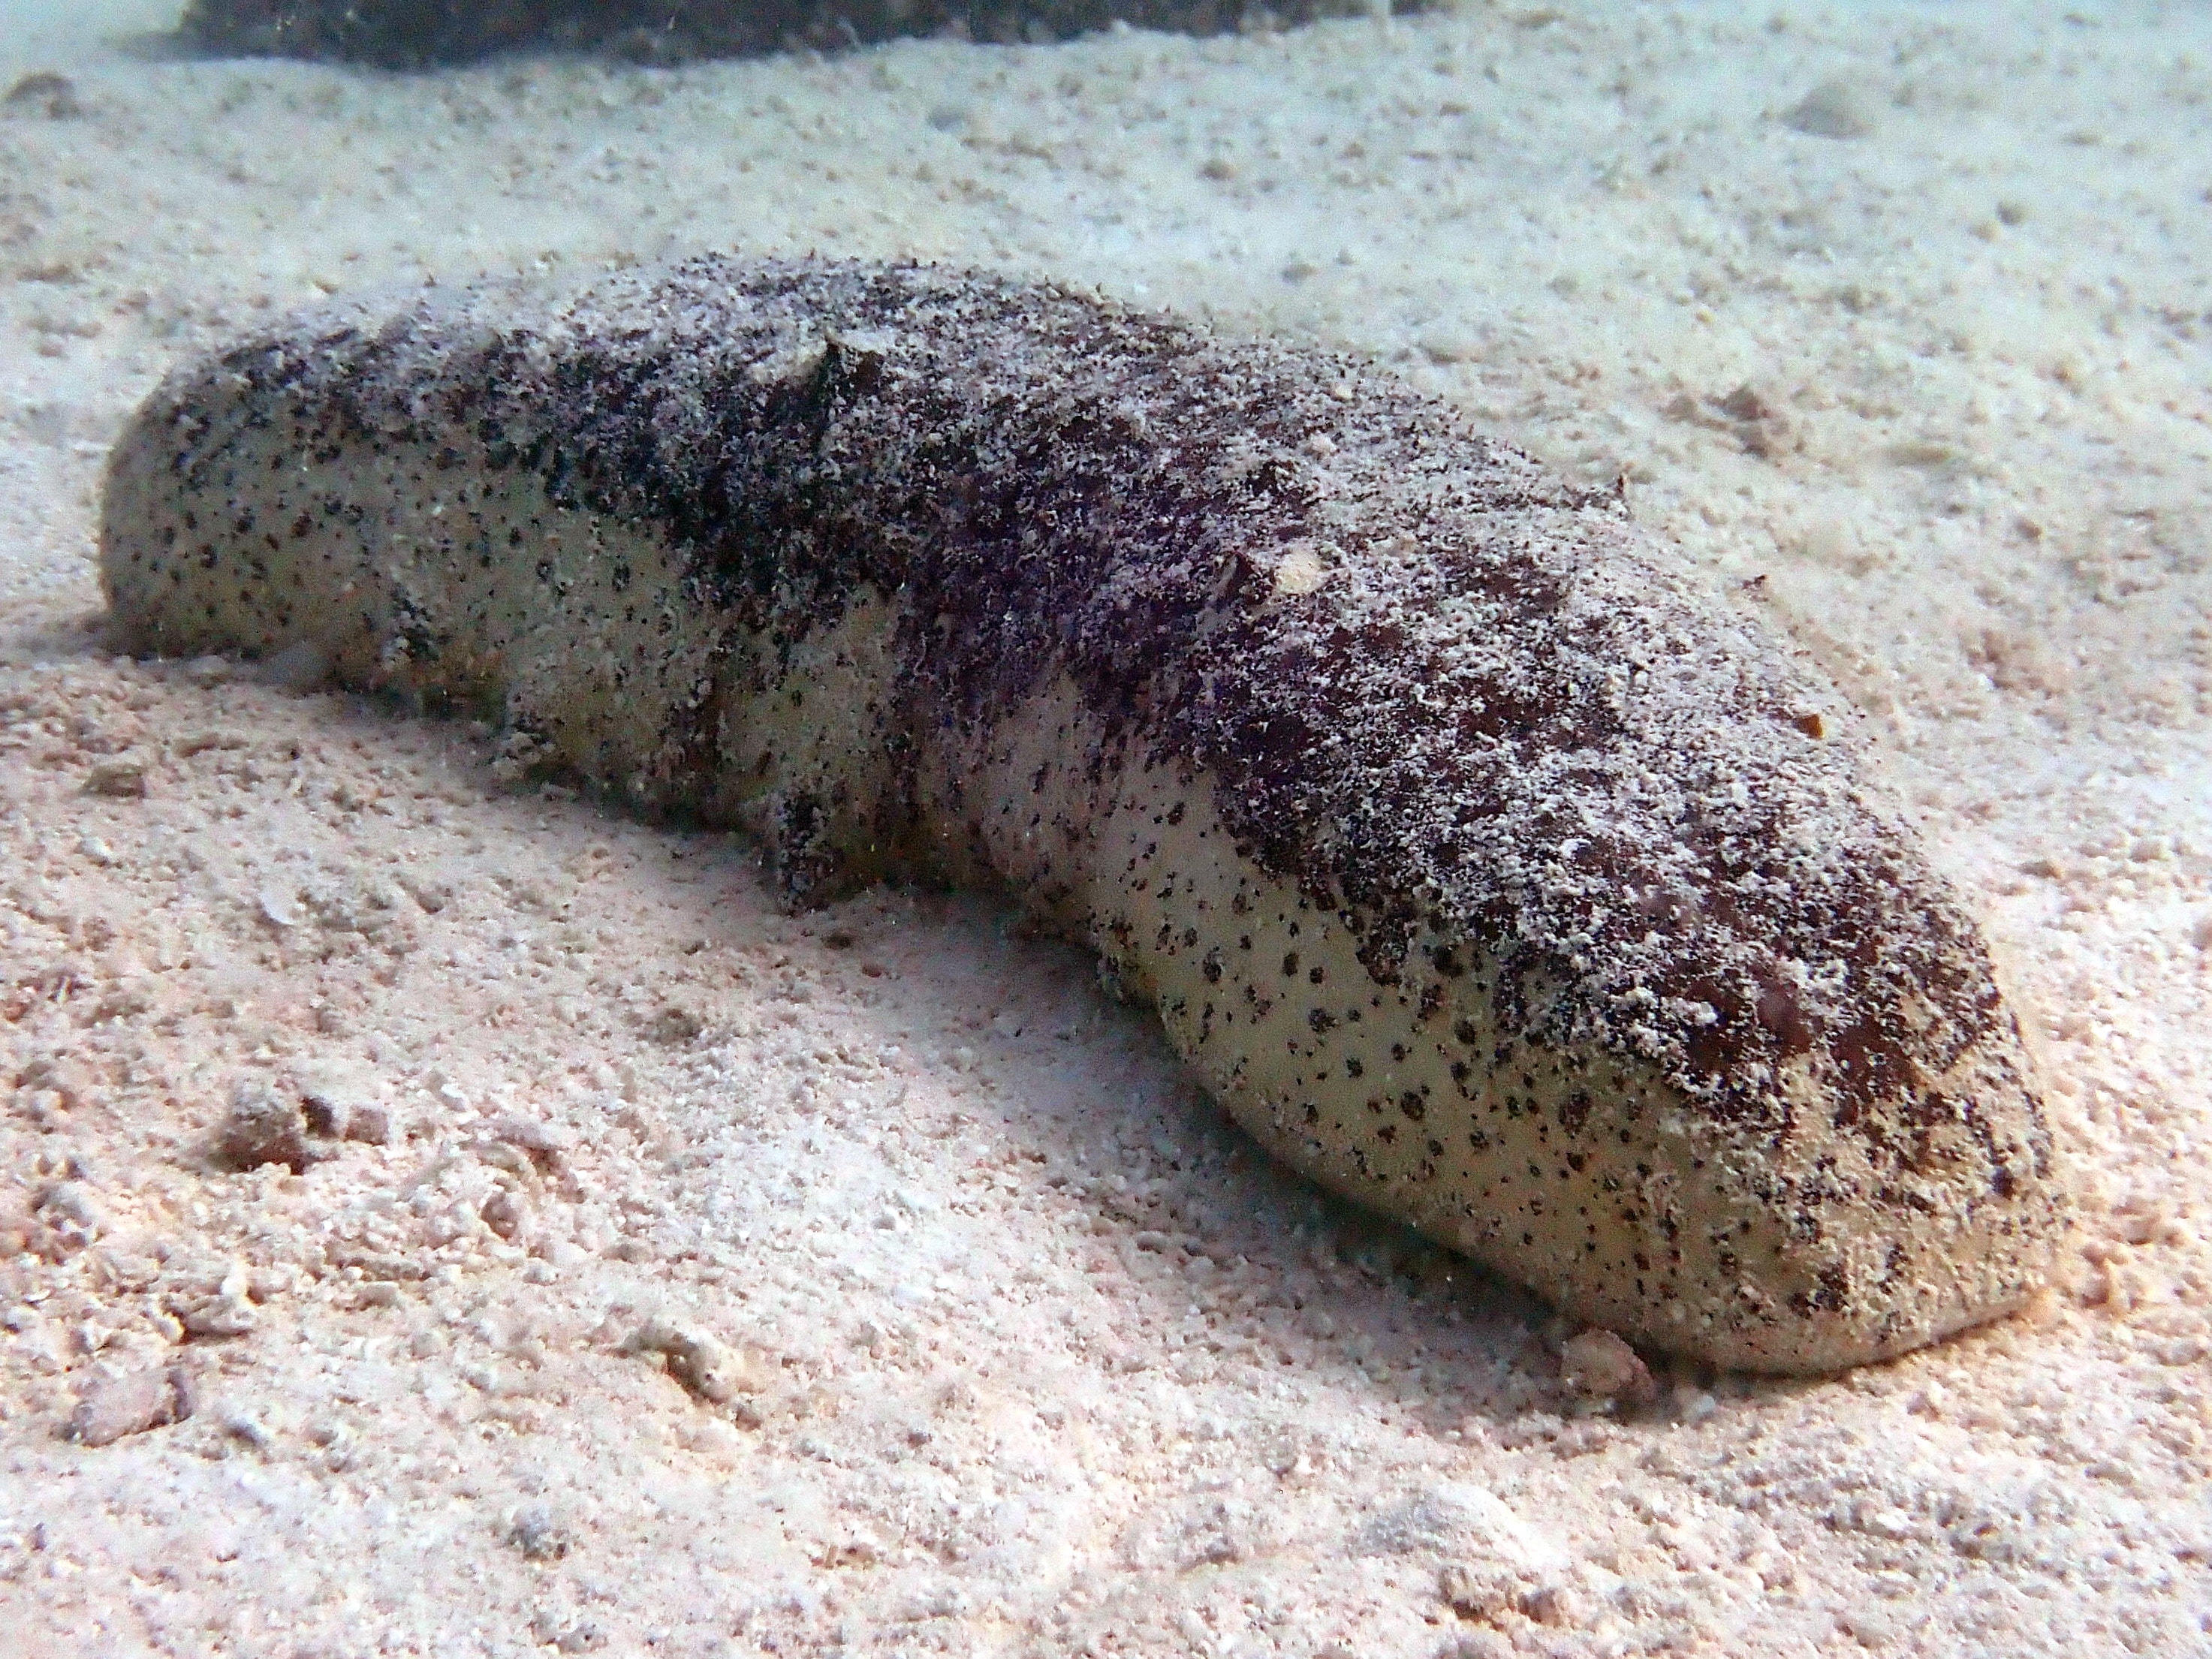 Endangered delicacy Tropical sea cucumbers in trouble - The University of  Sydney